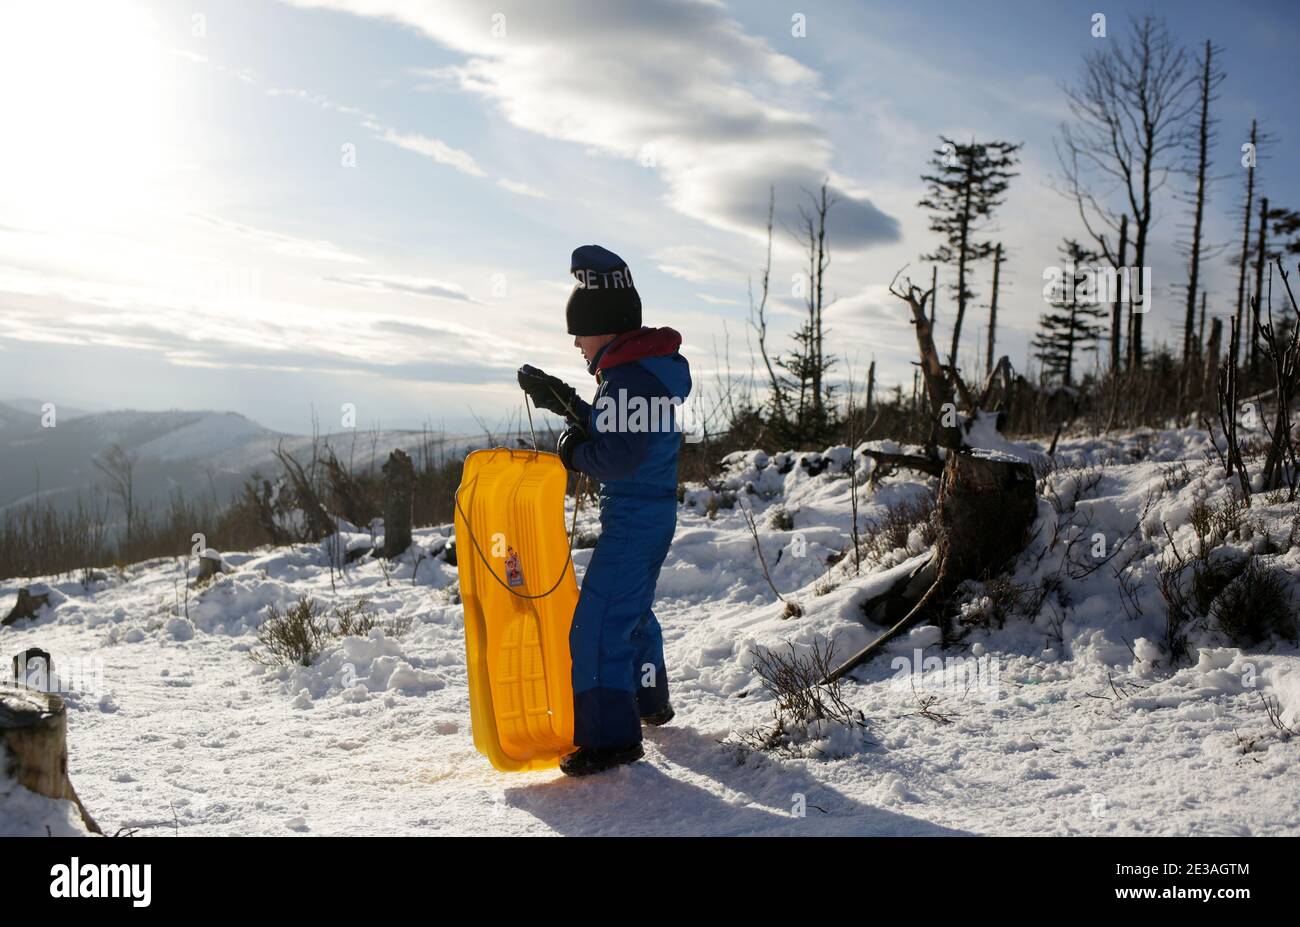 Skrzyczne, Poland - January 17, 2021: A little boy rides a sledge on the top of Skrzyczne in the Silesian Beskids Stock Photo